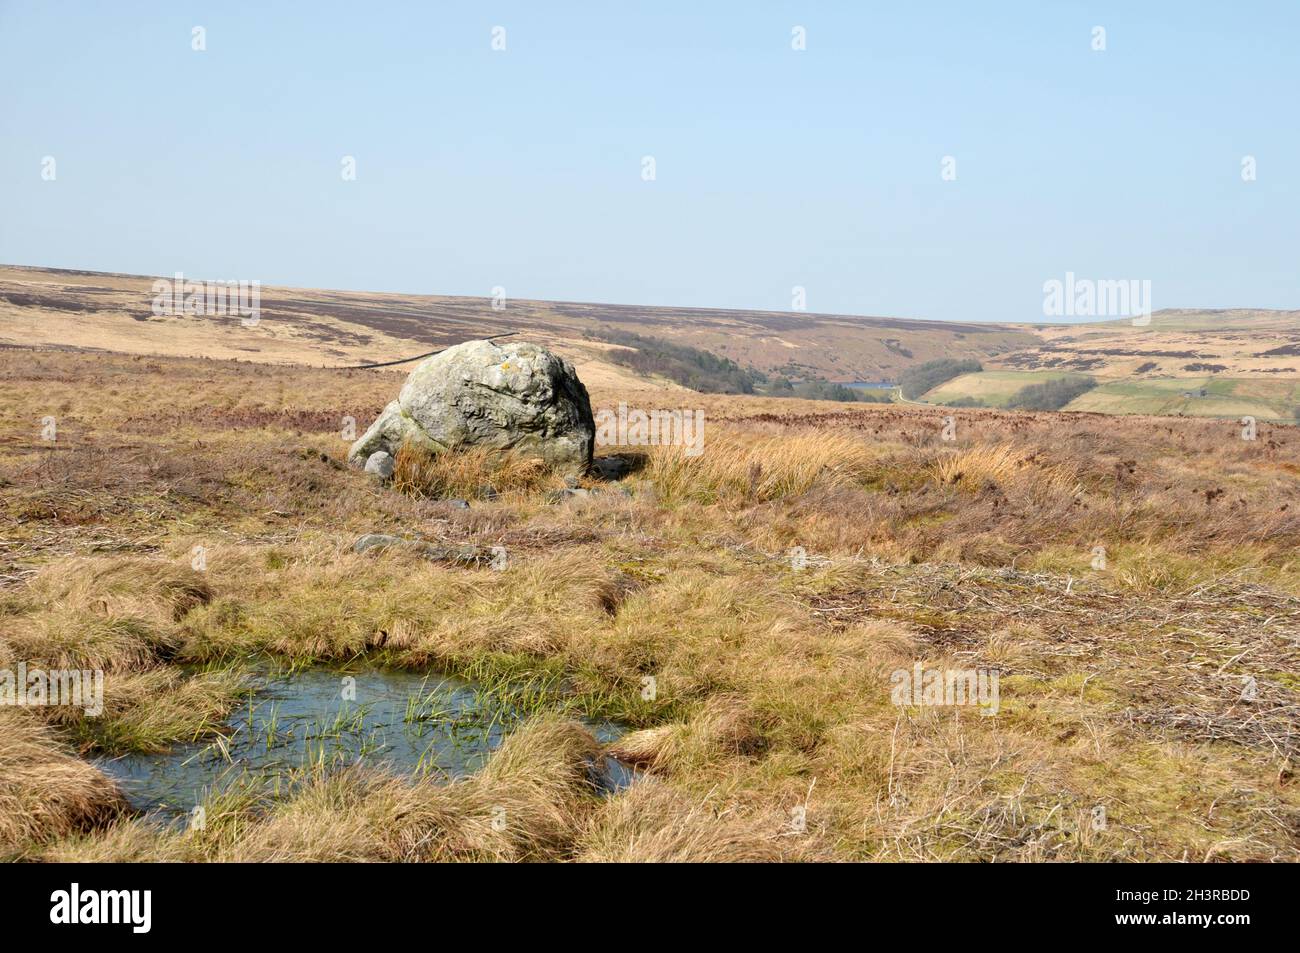 Pennine landscape with large old boulder or standing stone on midgley moor in west yorkshire Stock Photo